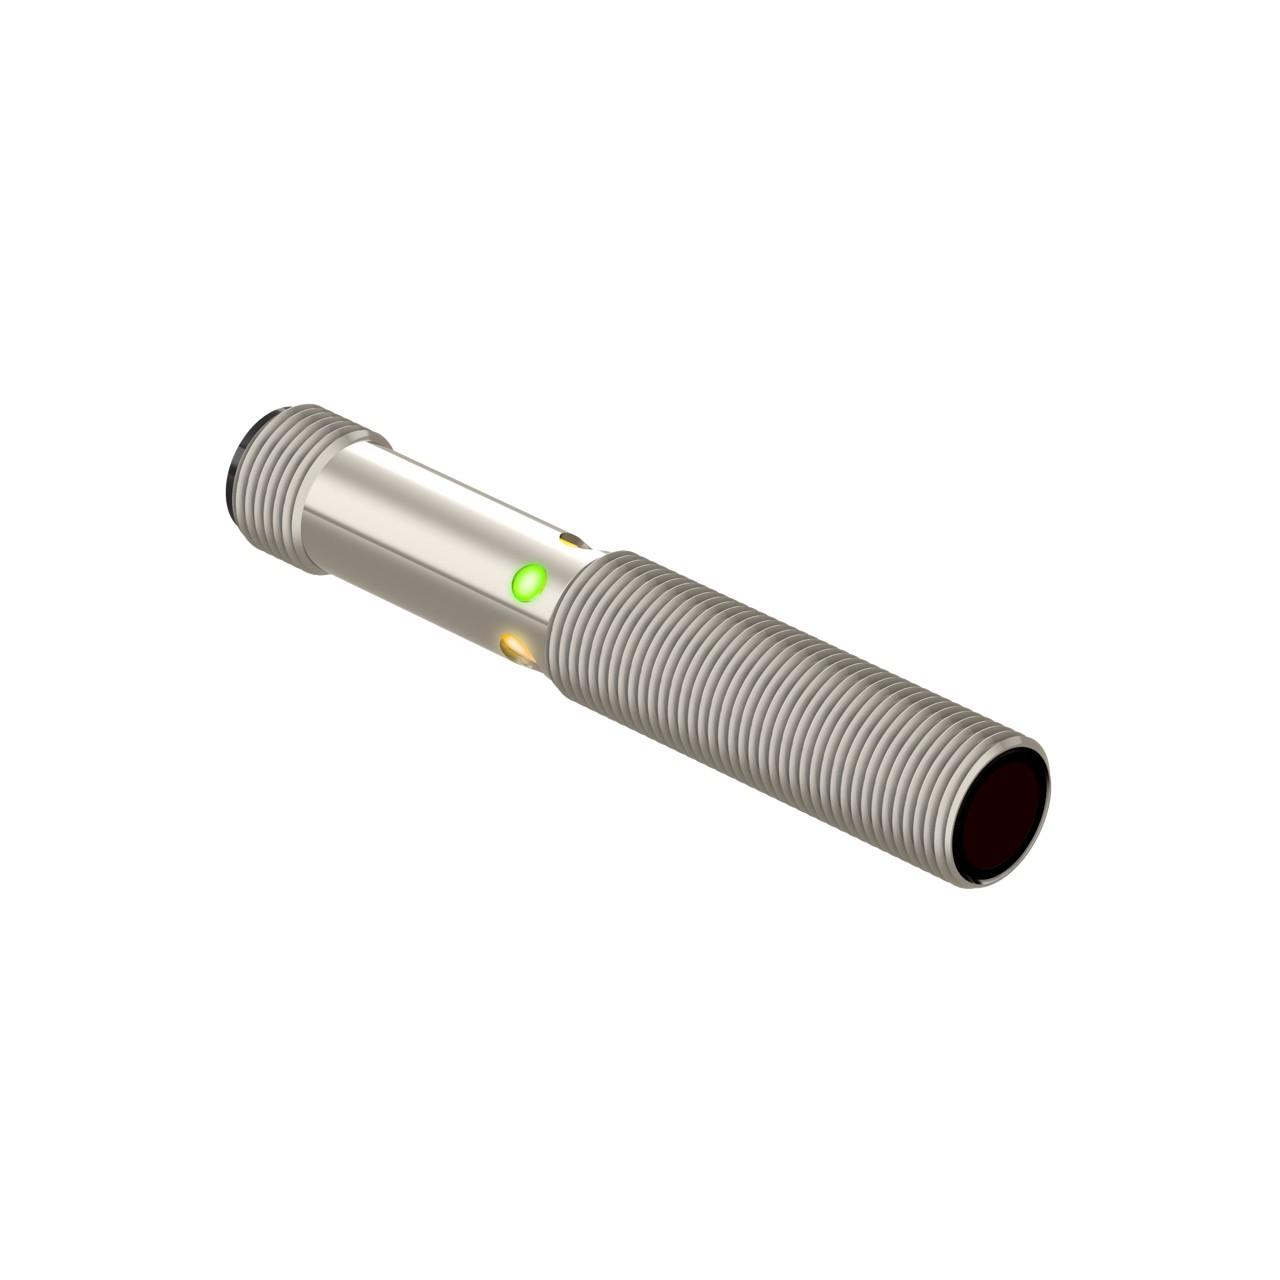 Banner M12EQ8 Photo-electric emitter with through-beam system / opposed mode - Banner Engineering (M12 barrel series - M12) - Part #77203 - Visible red light (660nm) - Supply voltage 10Vdc-30Vdc (12Vdc / 24Vdc nom.) - Pre-equipped with 4-pin Euro-style M12 connector - 